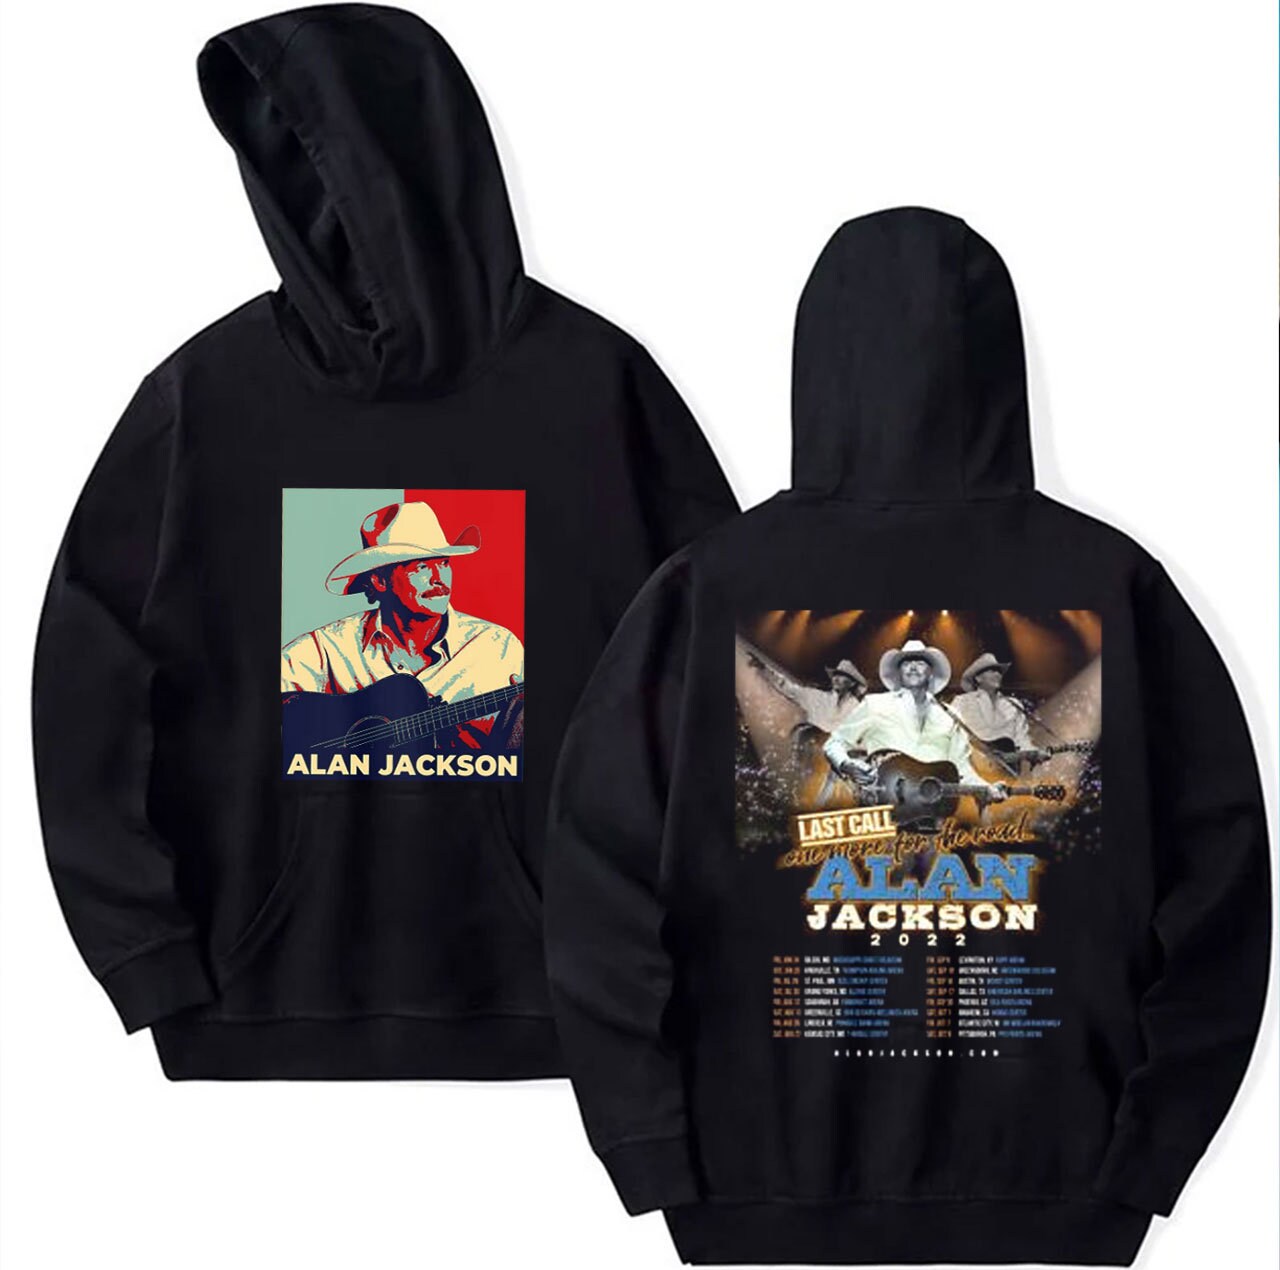 Alan Jackson Last Call One More for The Road Tour 2022 Shirt Hoodie Sweatshirt and Tank for Fan